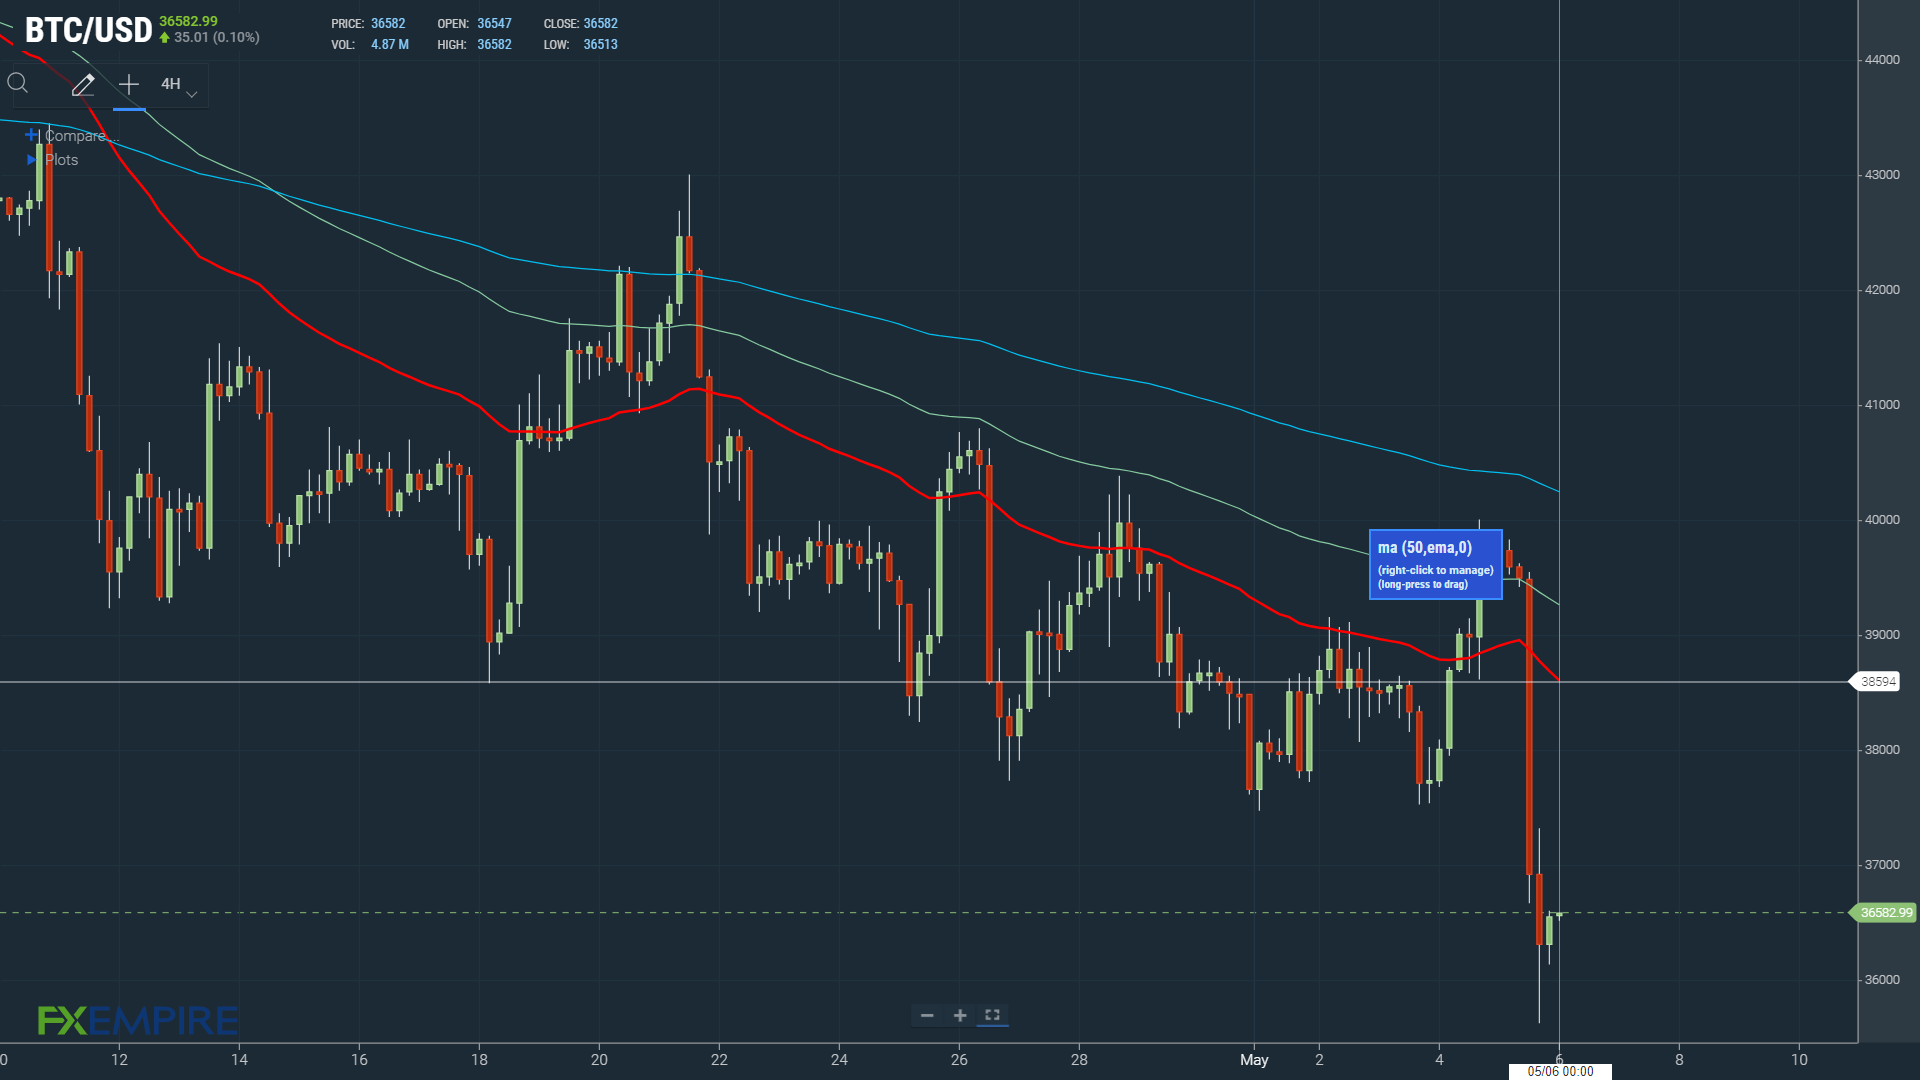 Fed fears leave BTC well below the 50-day EMA